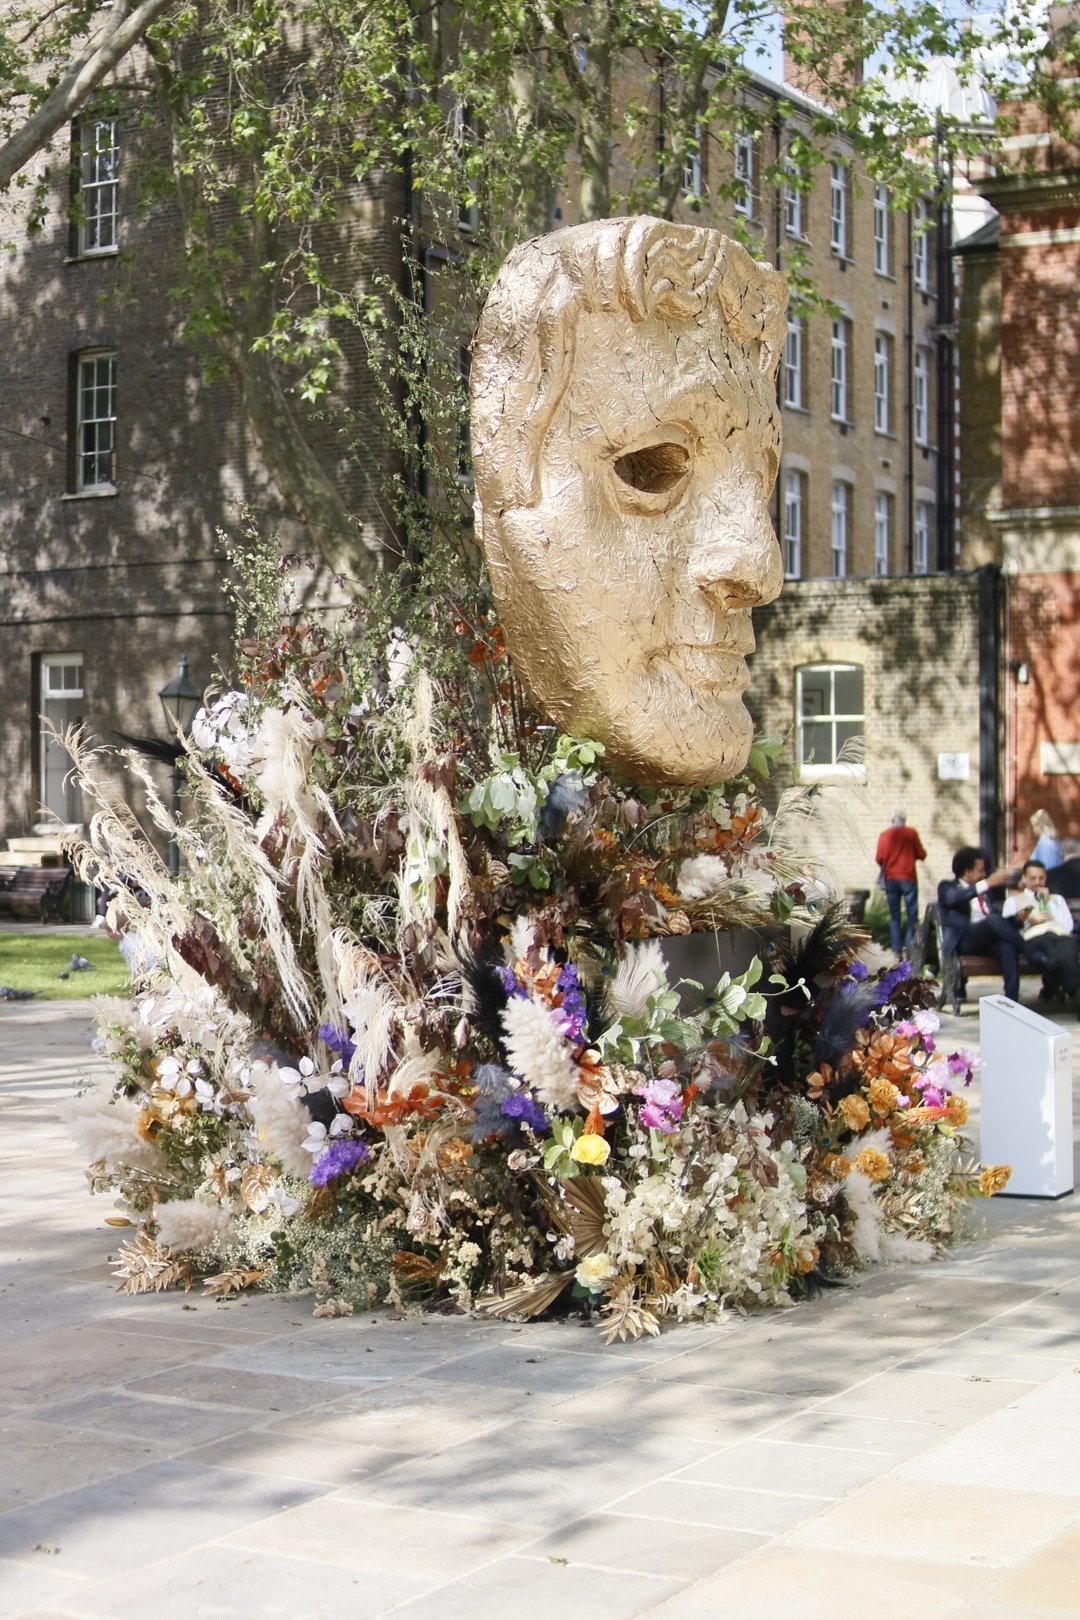 It's not long now until the beautiful event of Chelsea in Bloom, are you heading down to see the fabulous displays? We can't wait to see what's created this year!